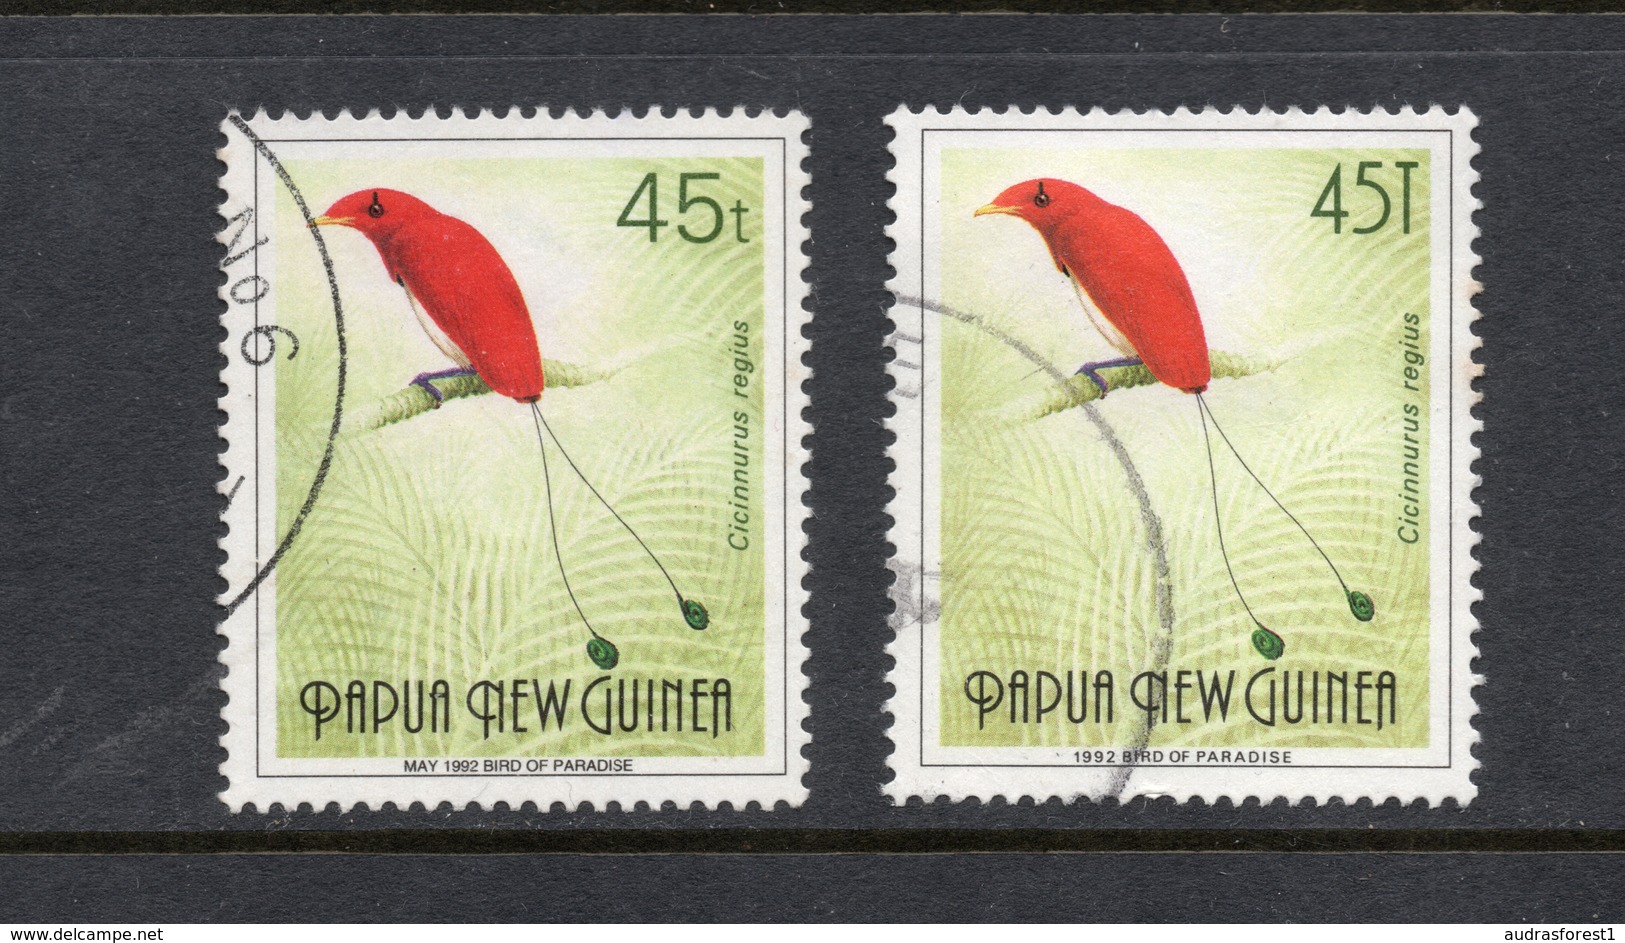 RED BIRD OF PARADISE PAPUA NEW GUINEA Both Values - 45t (issued In 1992) & 45T (1993 Issued In 1993) VERY FINE USED - Pájaros Cantores (Passeri)